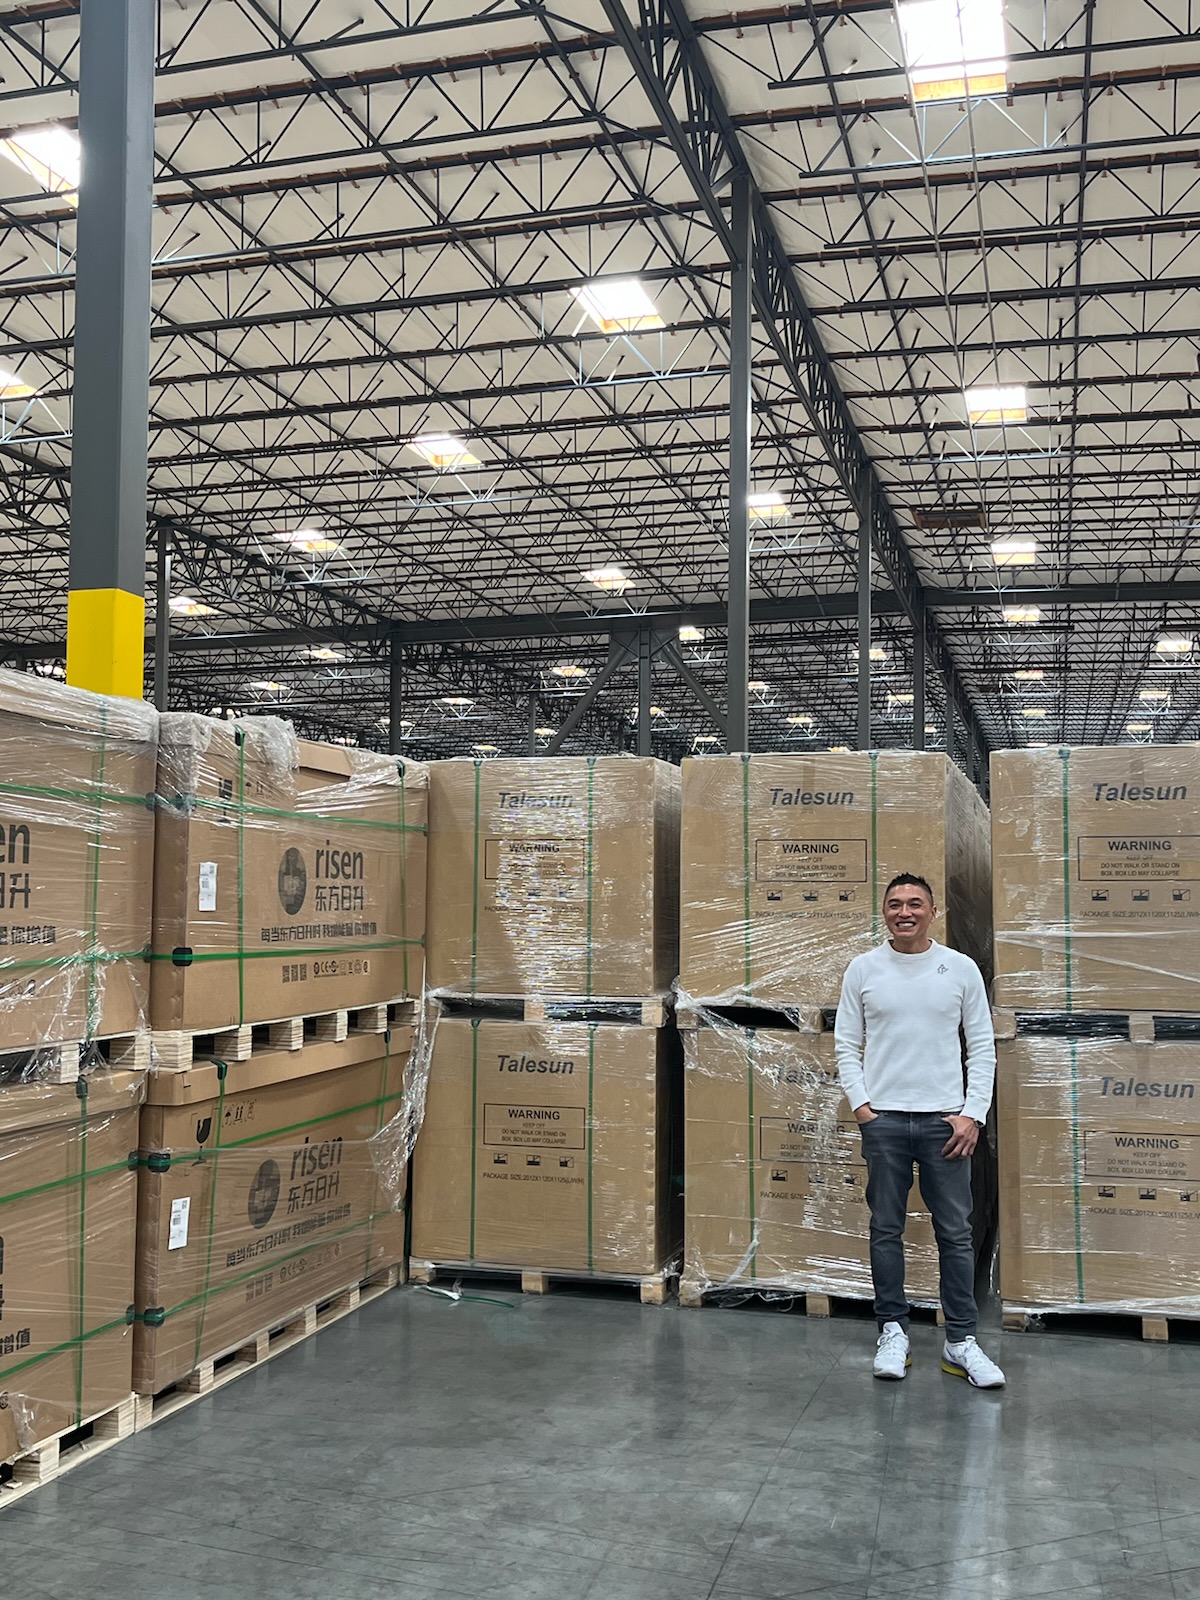 Warehouse Operations including Live Inventory